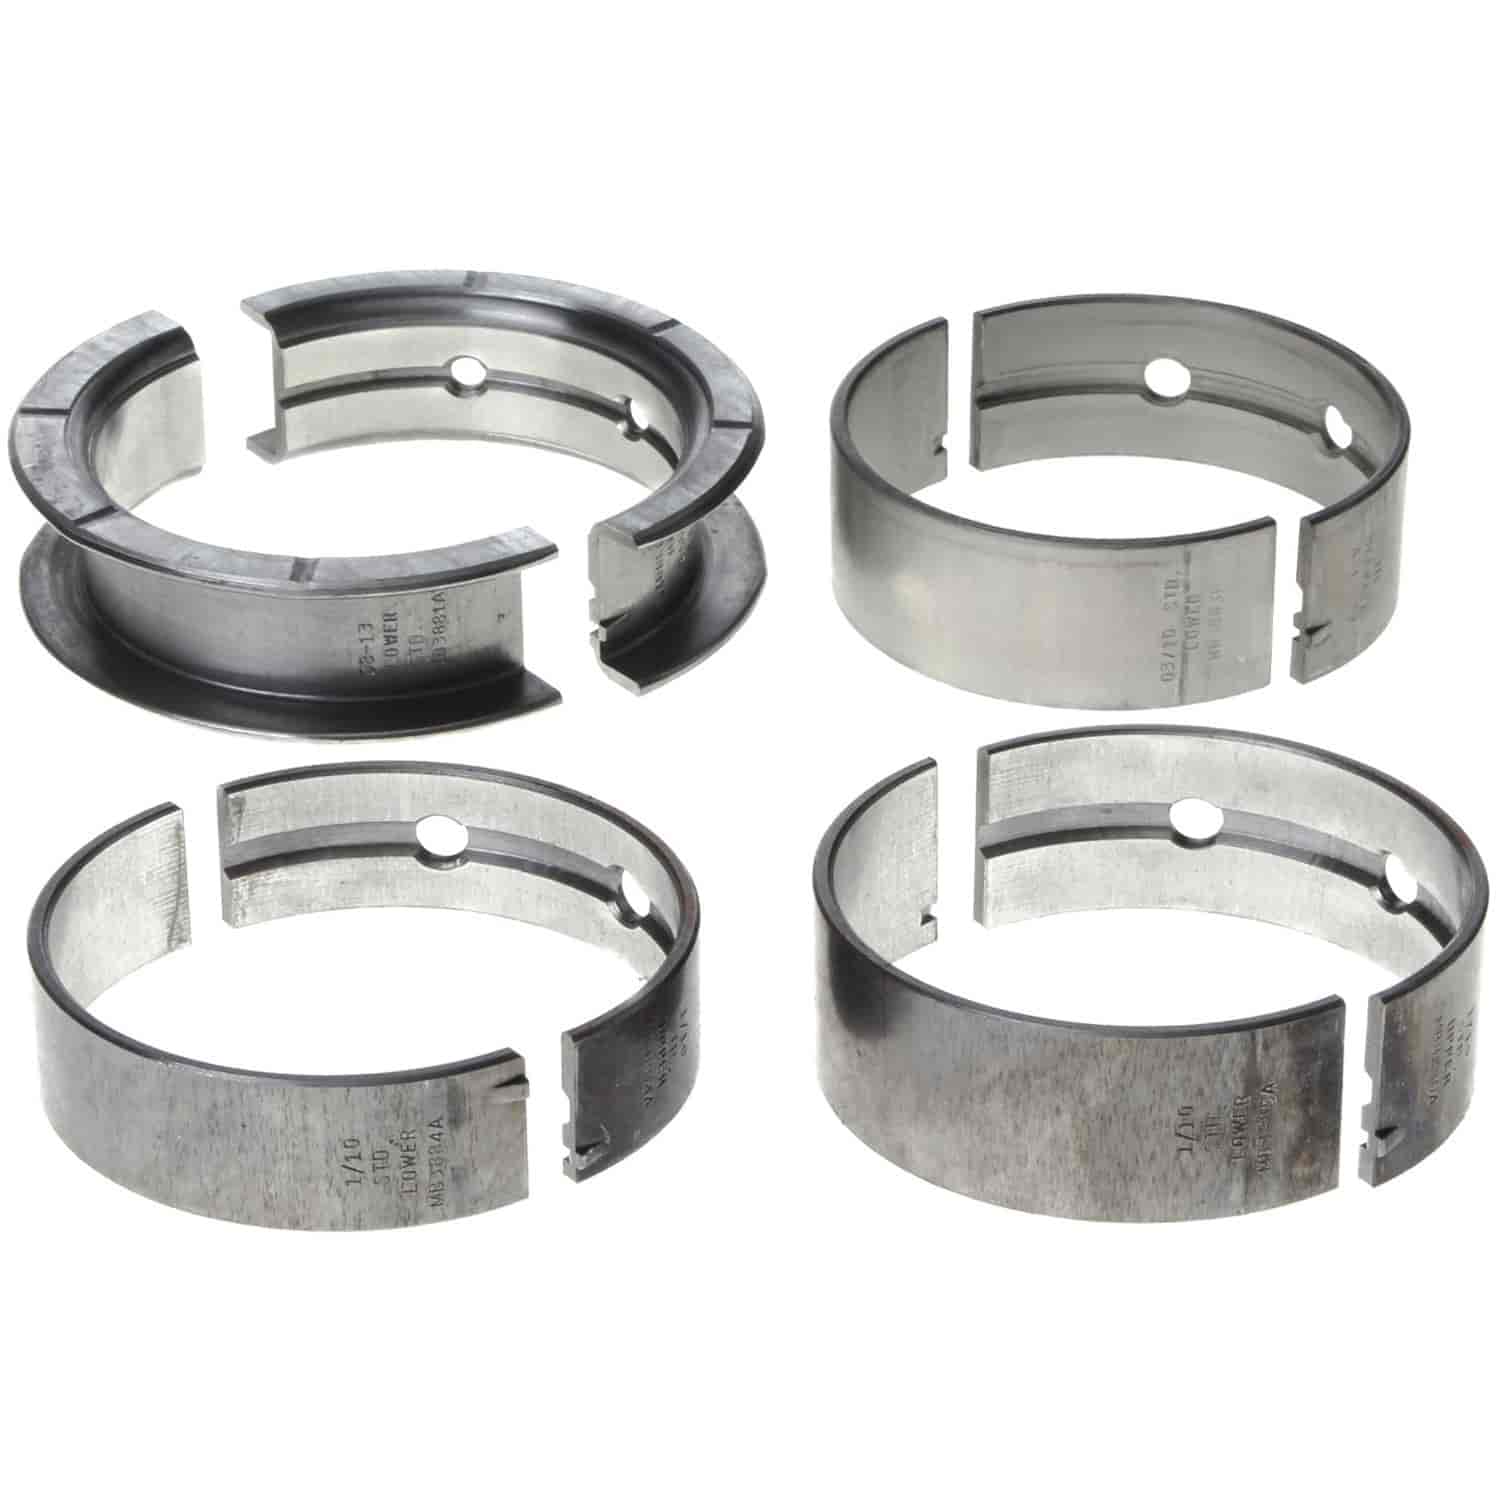 Main Bearing Set Chevy 2006-2011 V6 3.5/3.9L with -.50mm Undersize